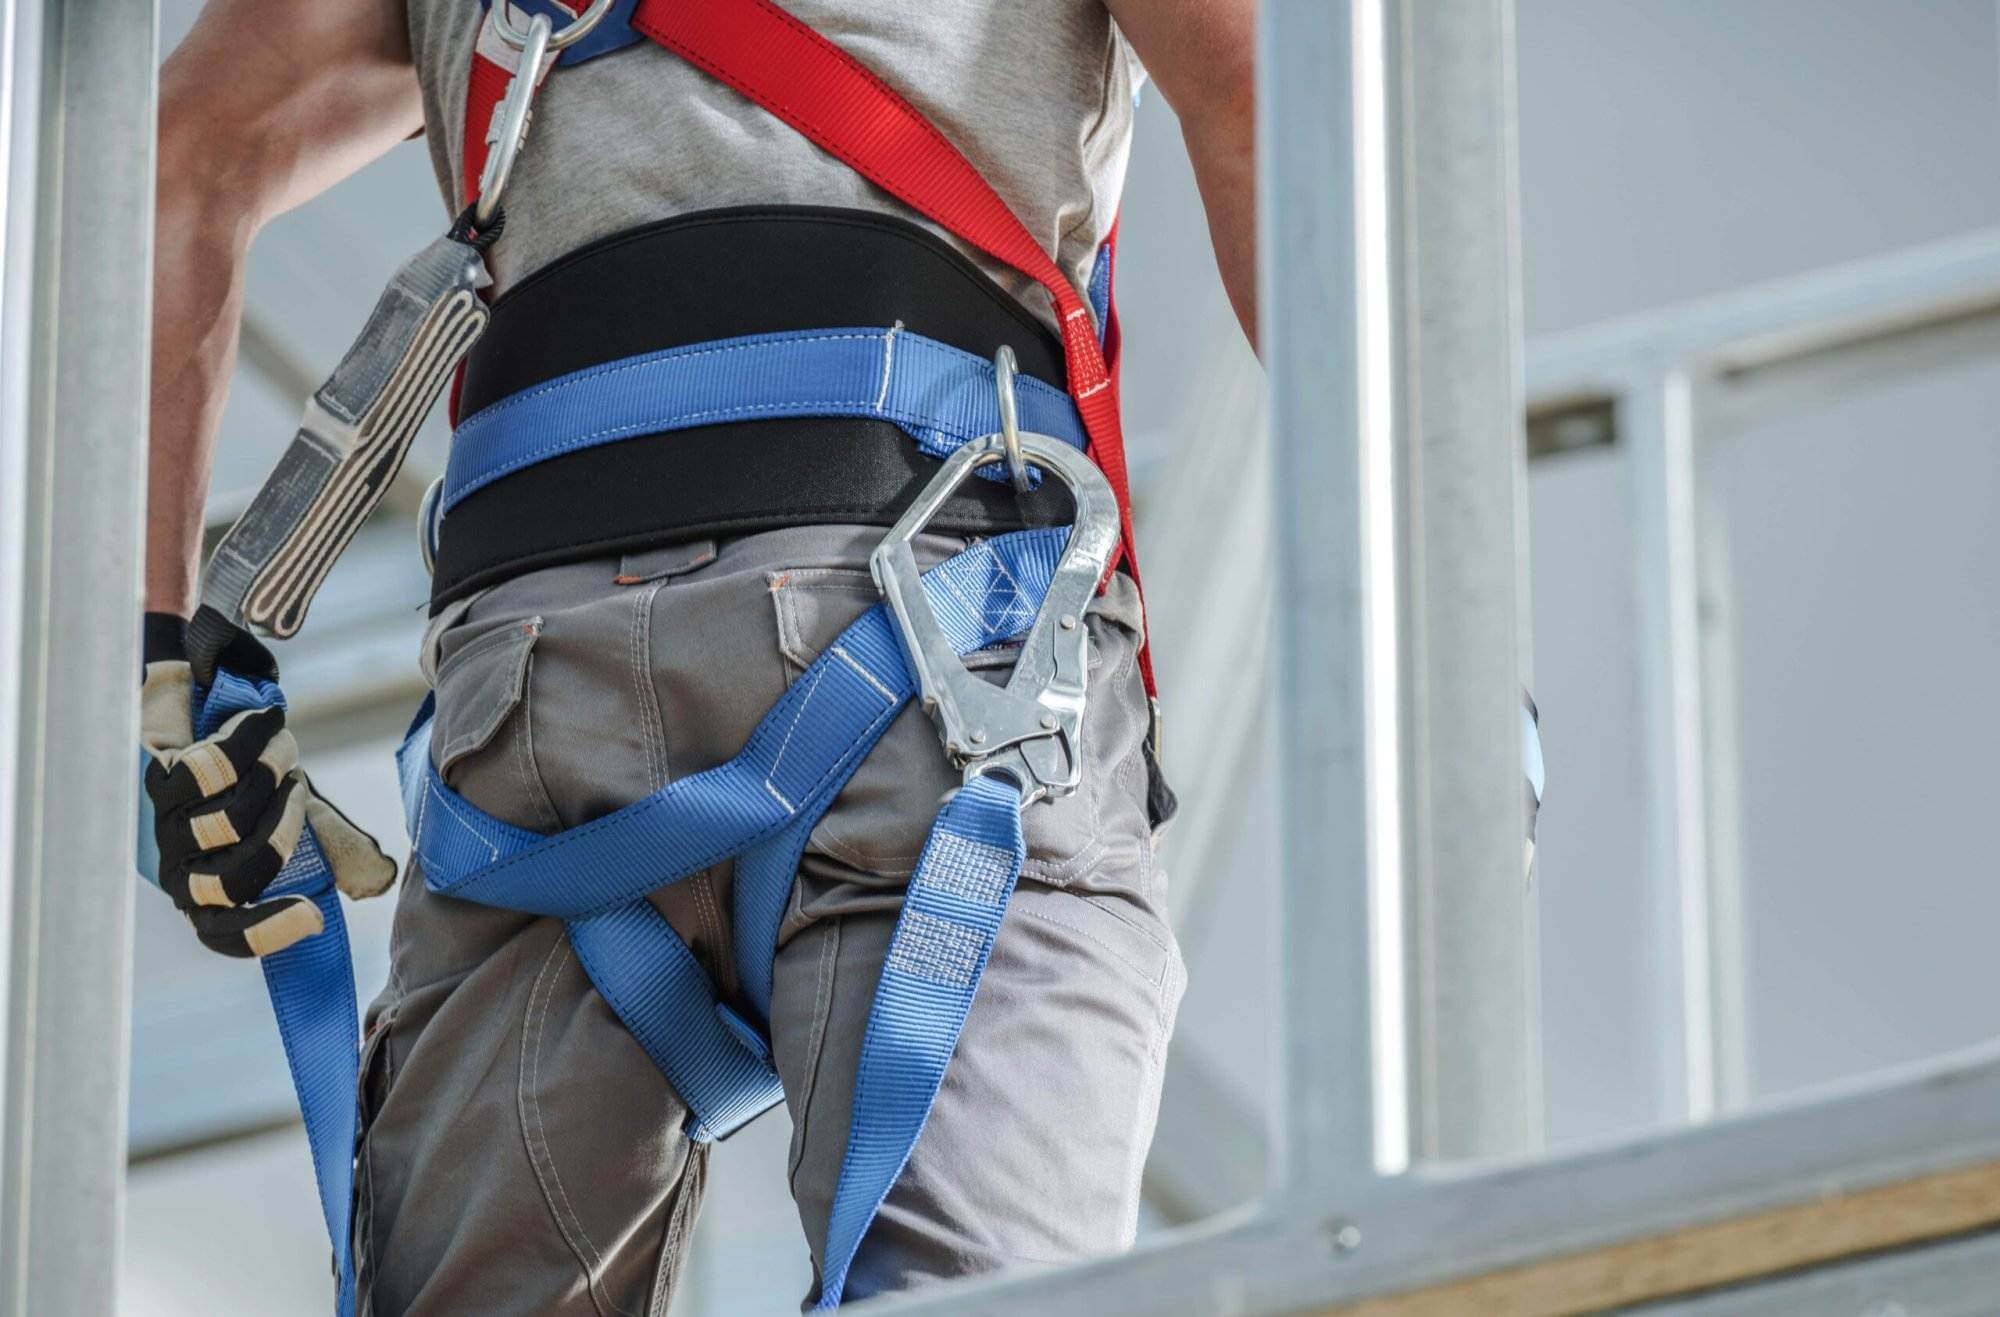 construction safety equipment ppe fall harness prevention